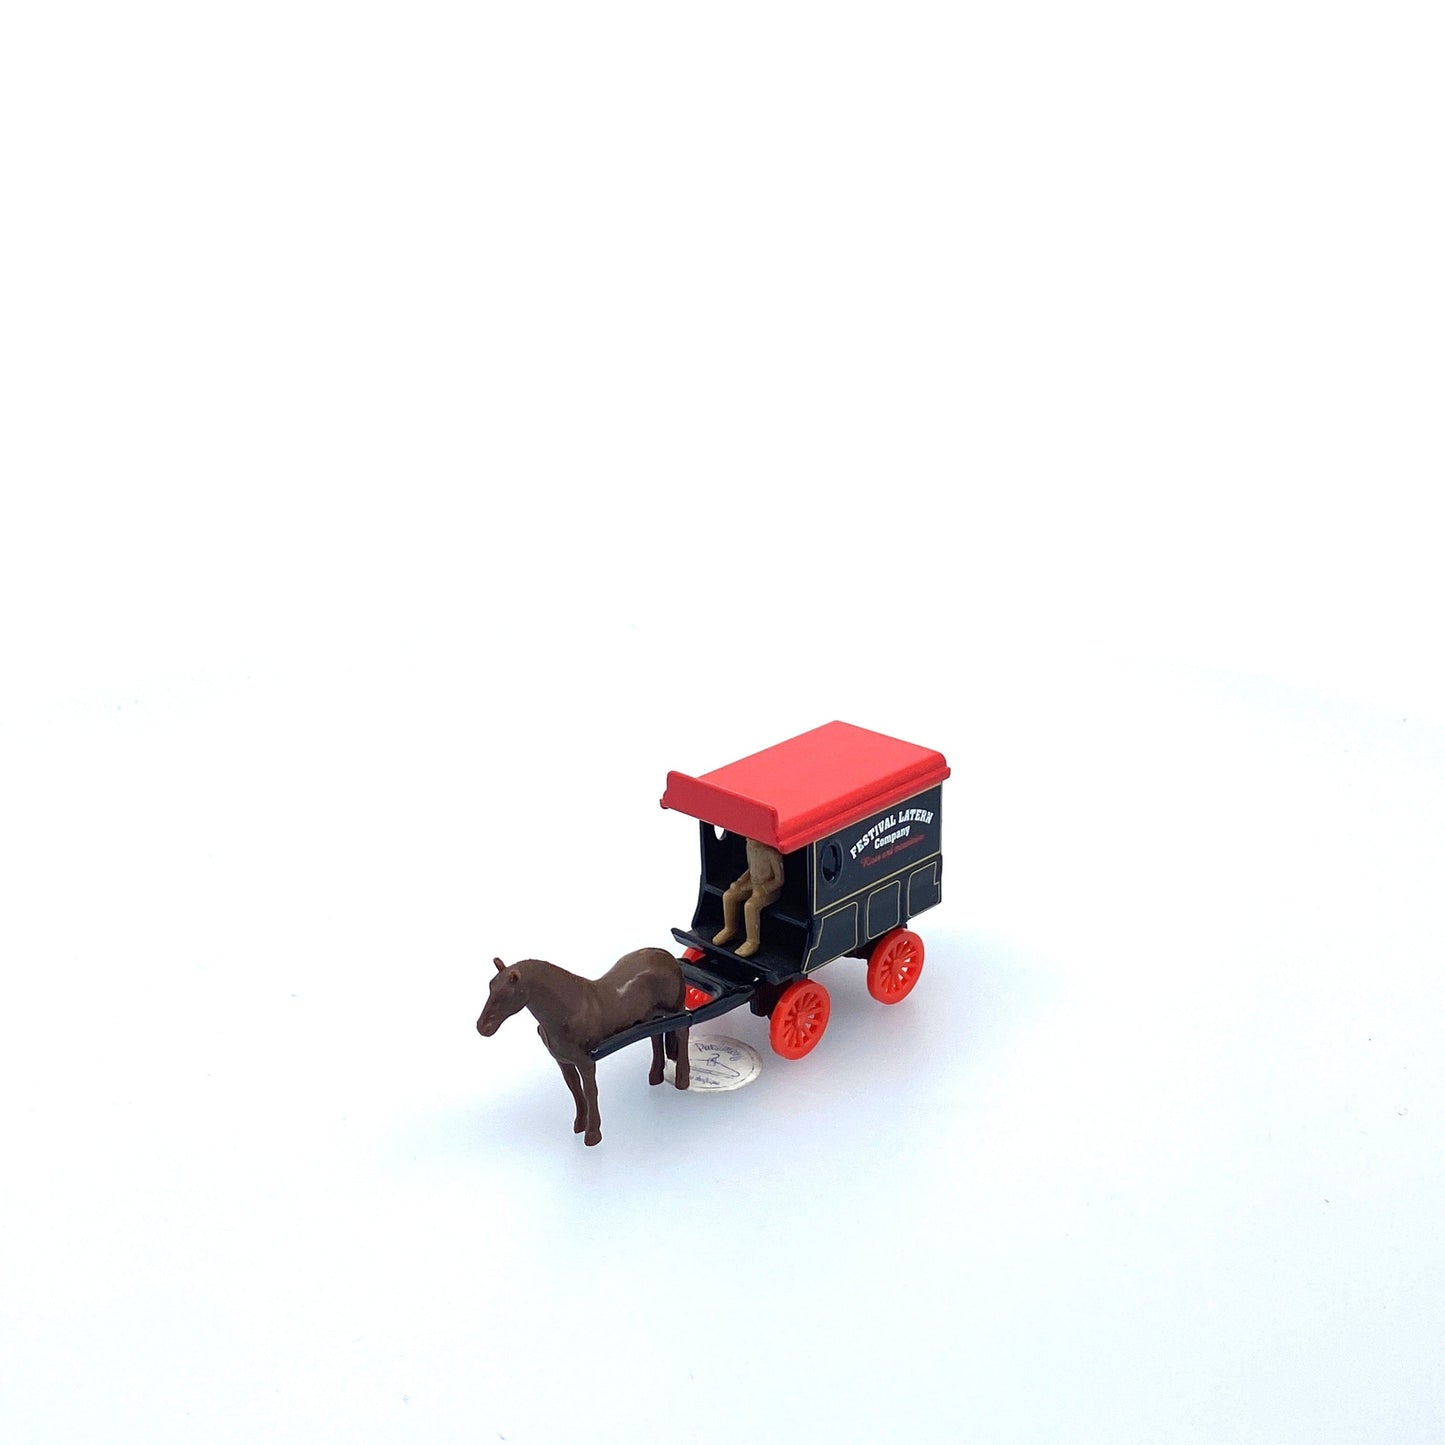 Vintage Olden Days “Festival Lantern Company” Horse-Drawn Delivery Wagon | Diecast Toy Vehicle